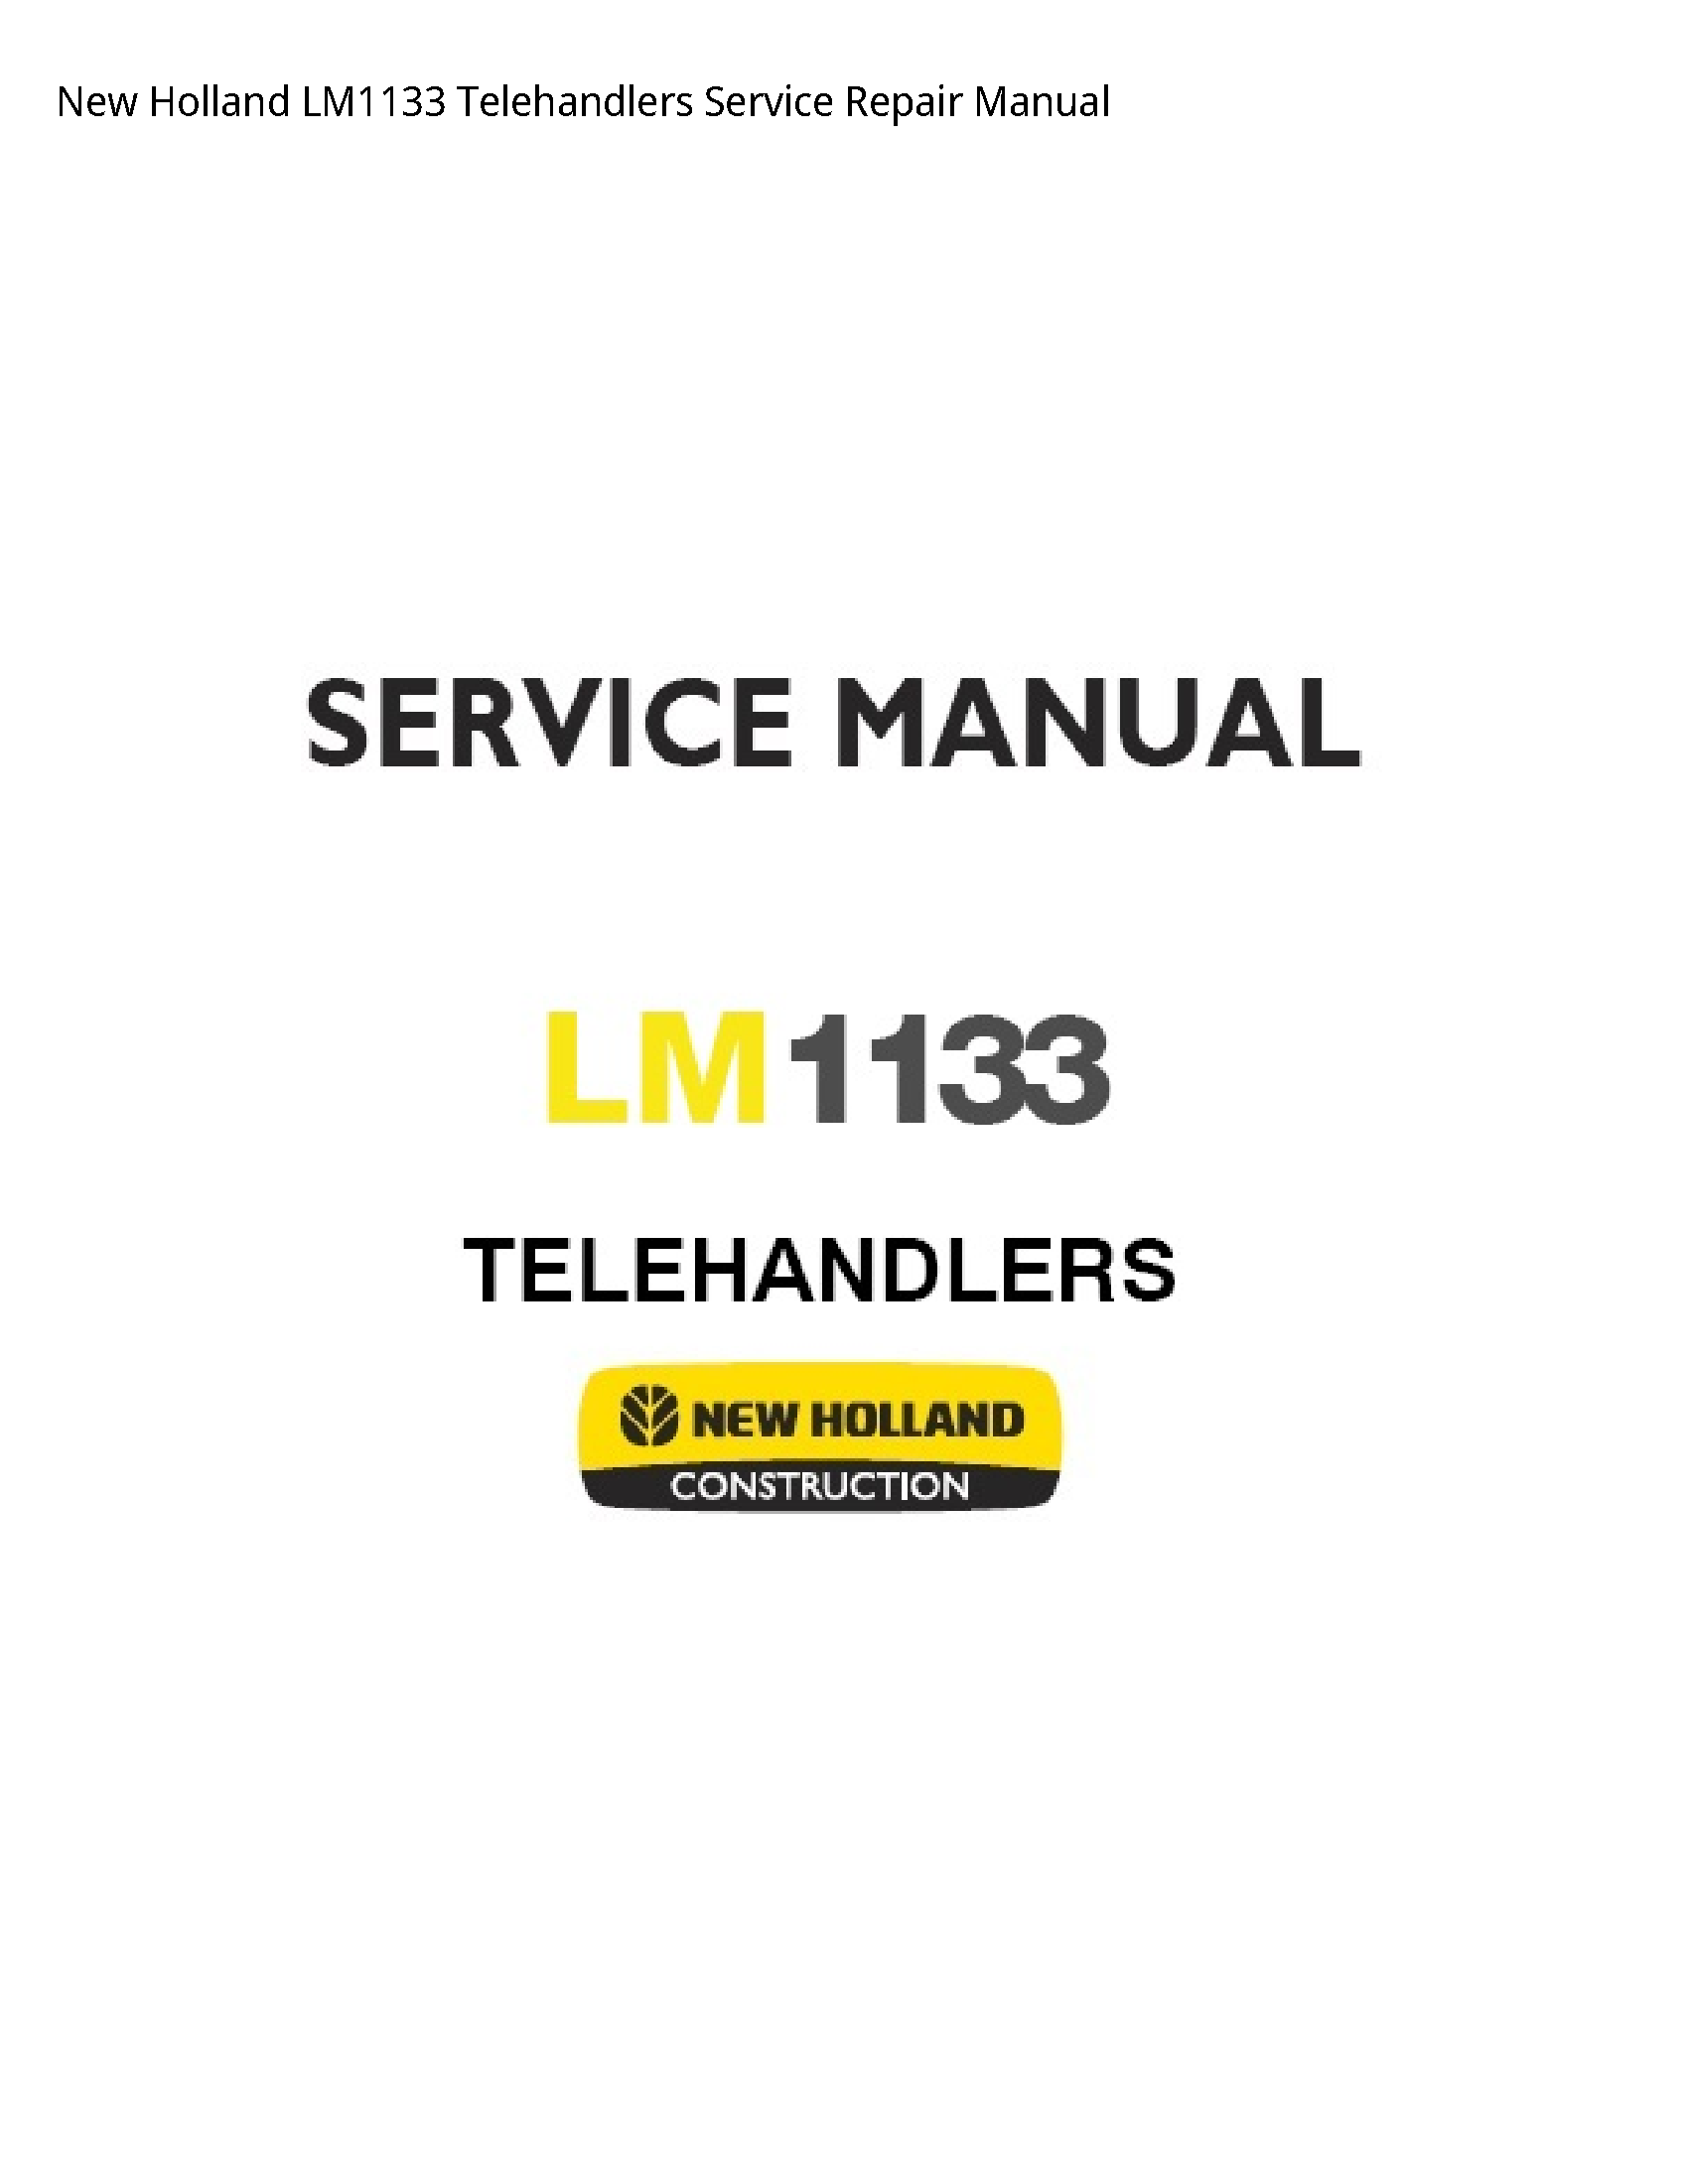 New Holland LM1133 Telehandlers manual